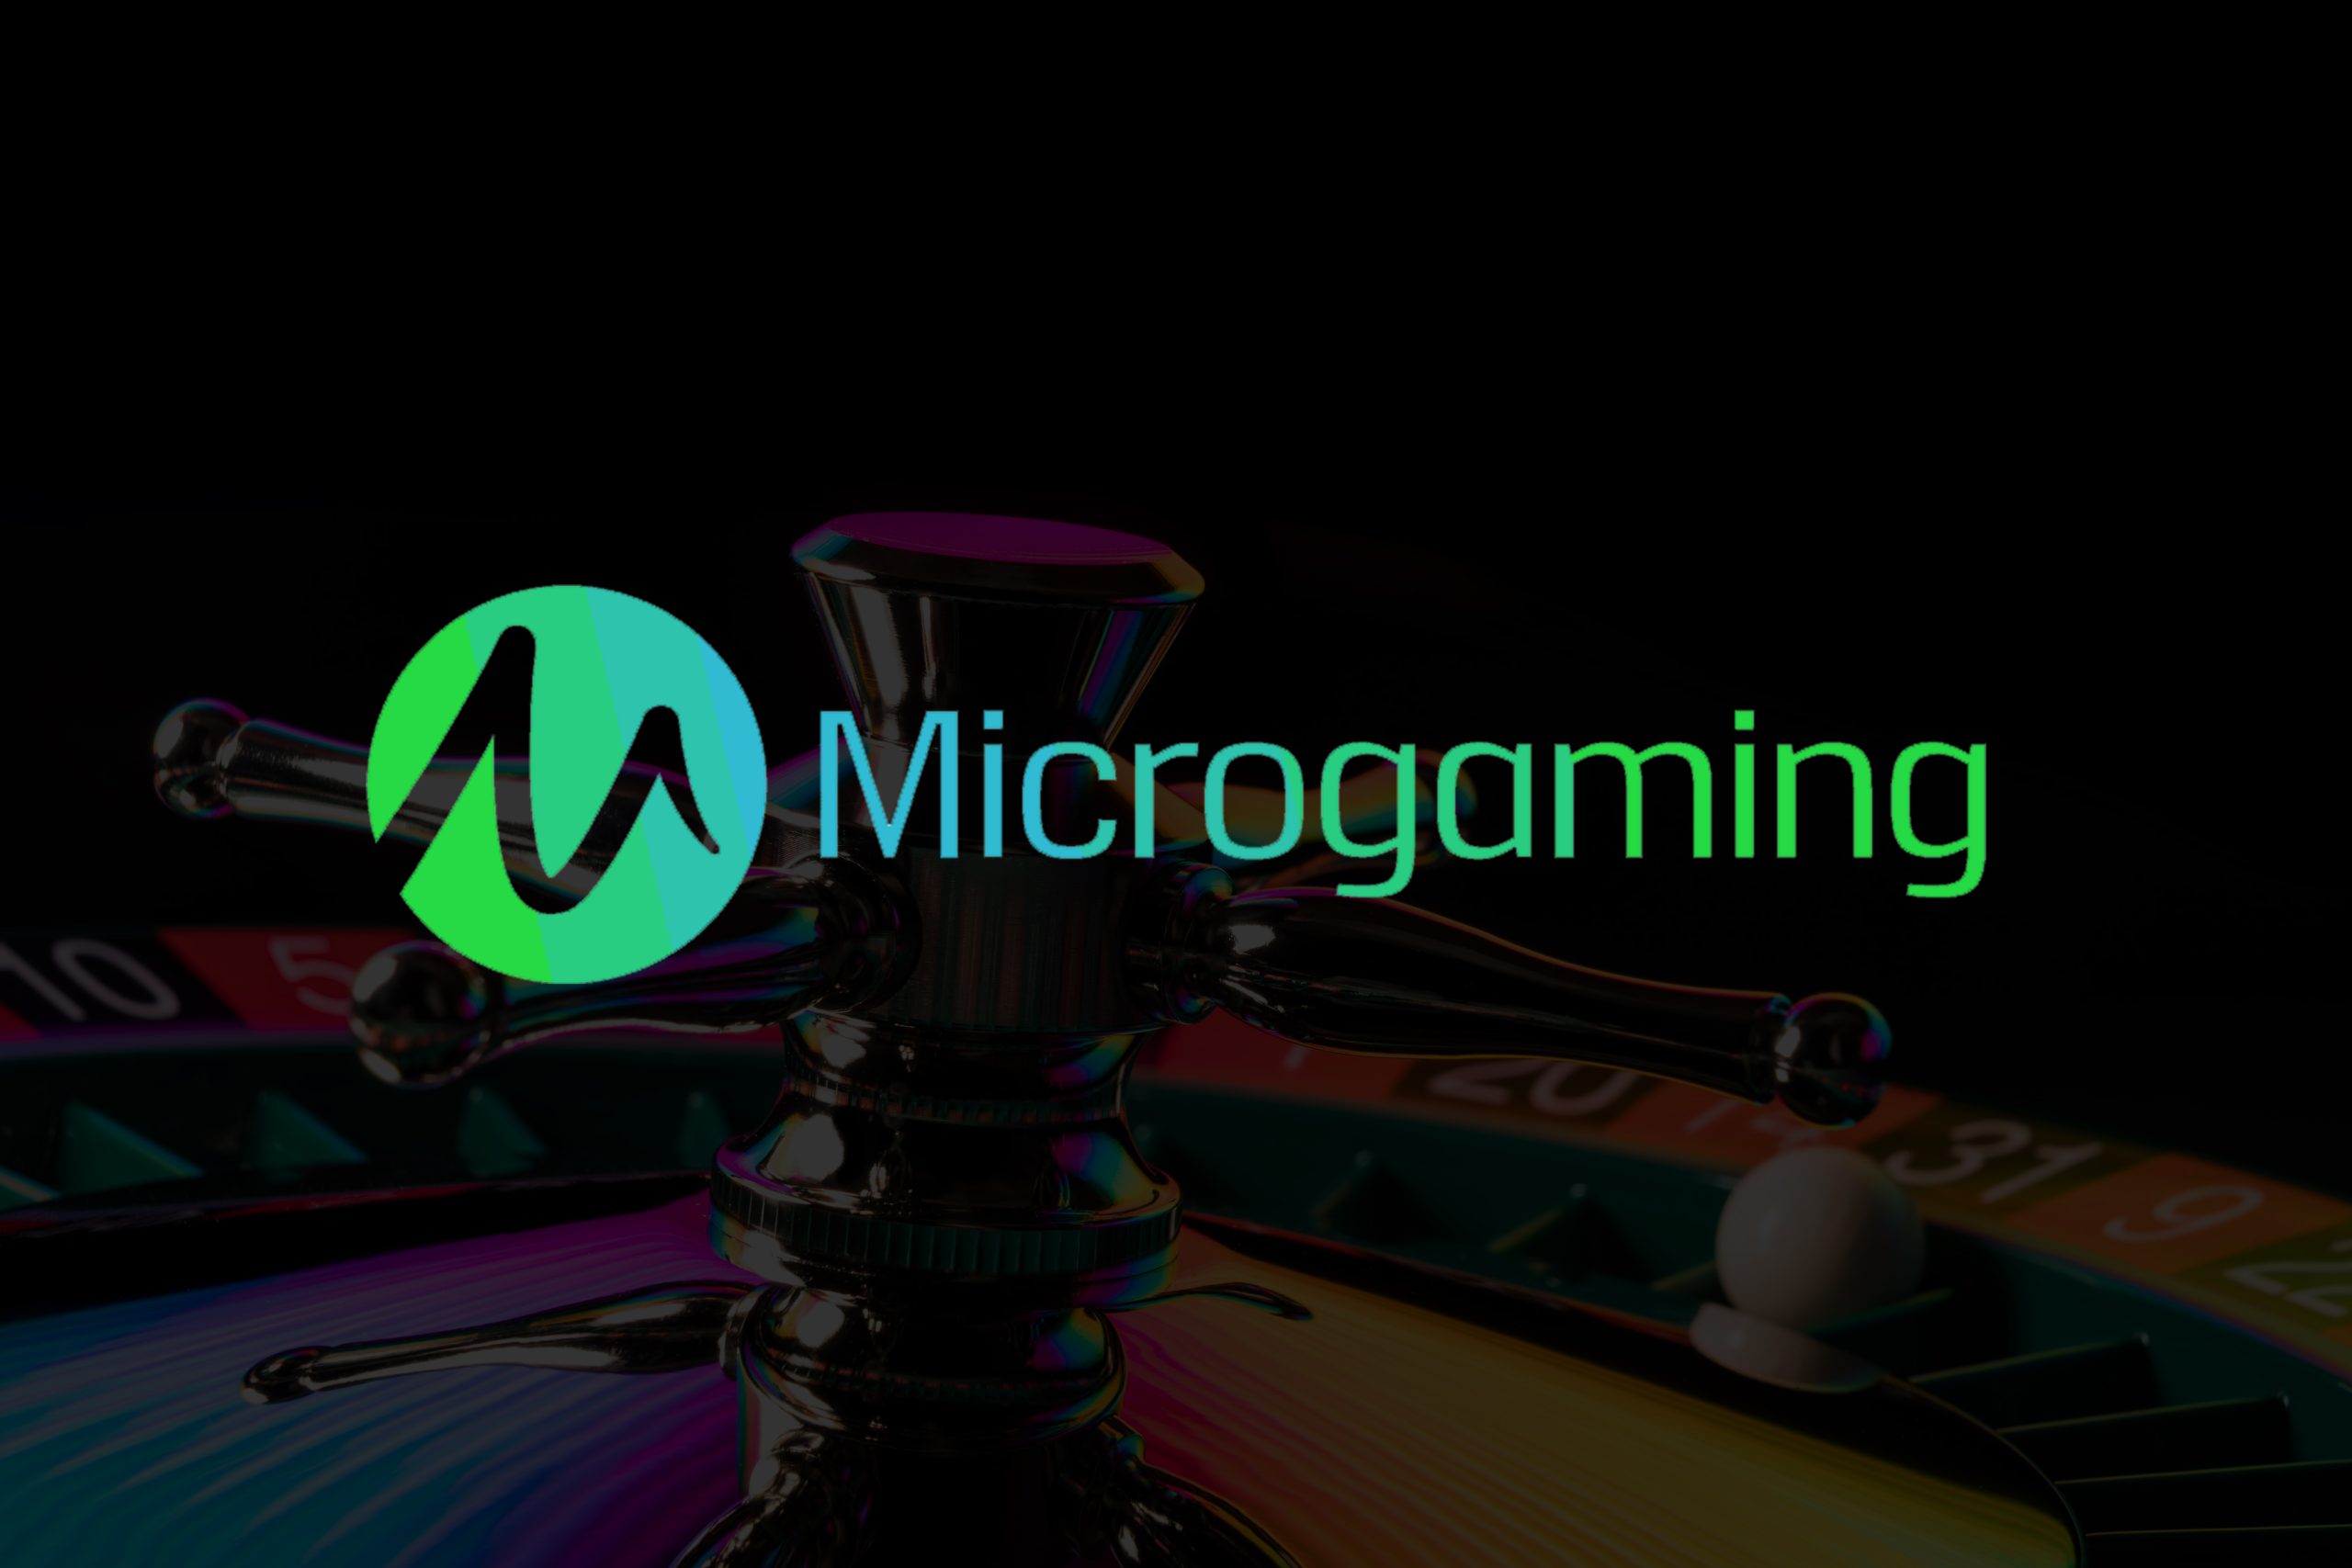 Microgaming Not On Gamstop?